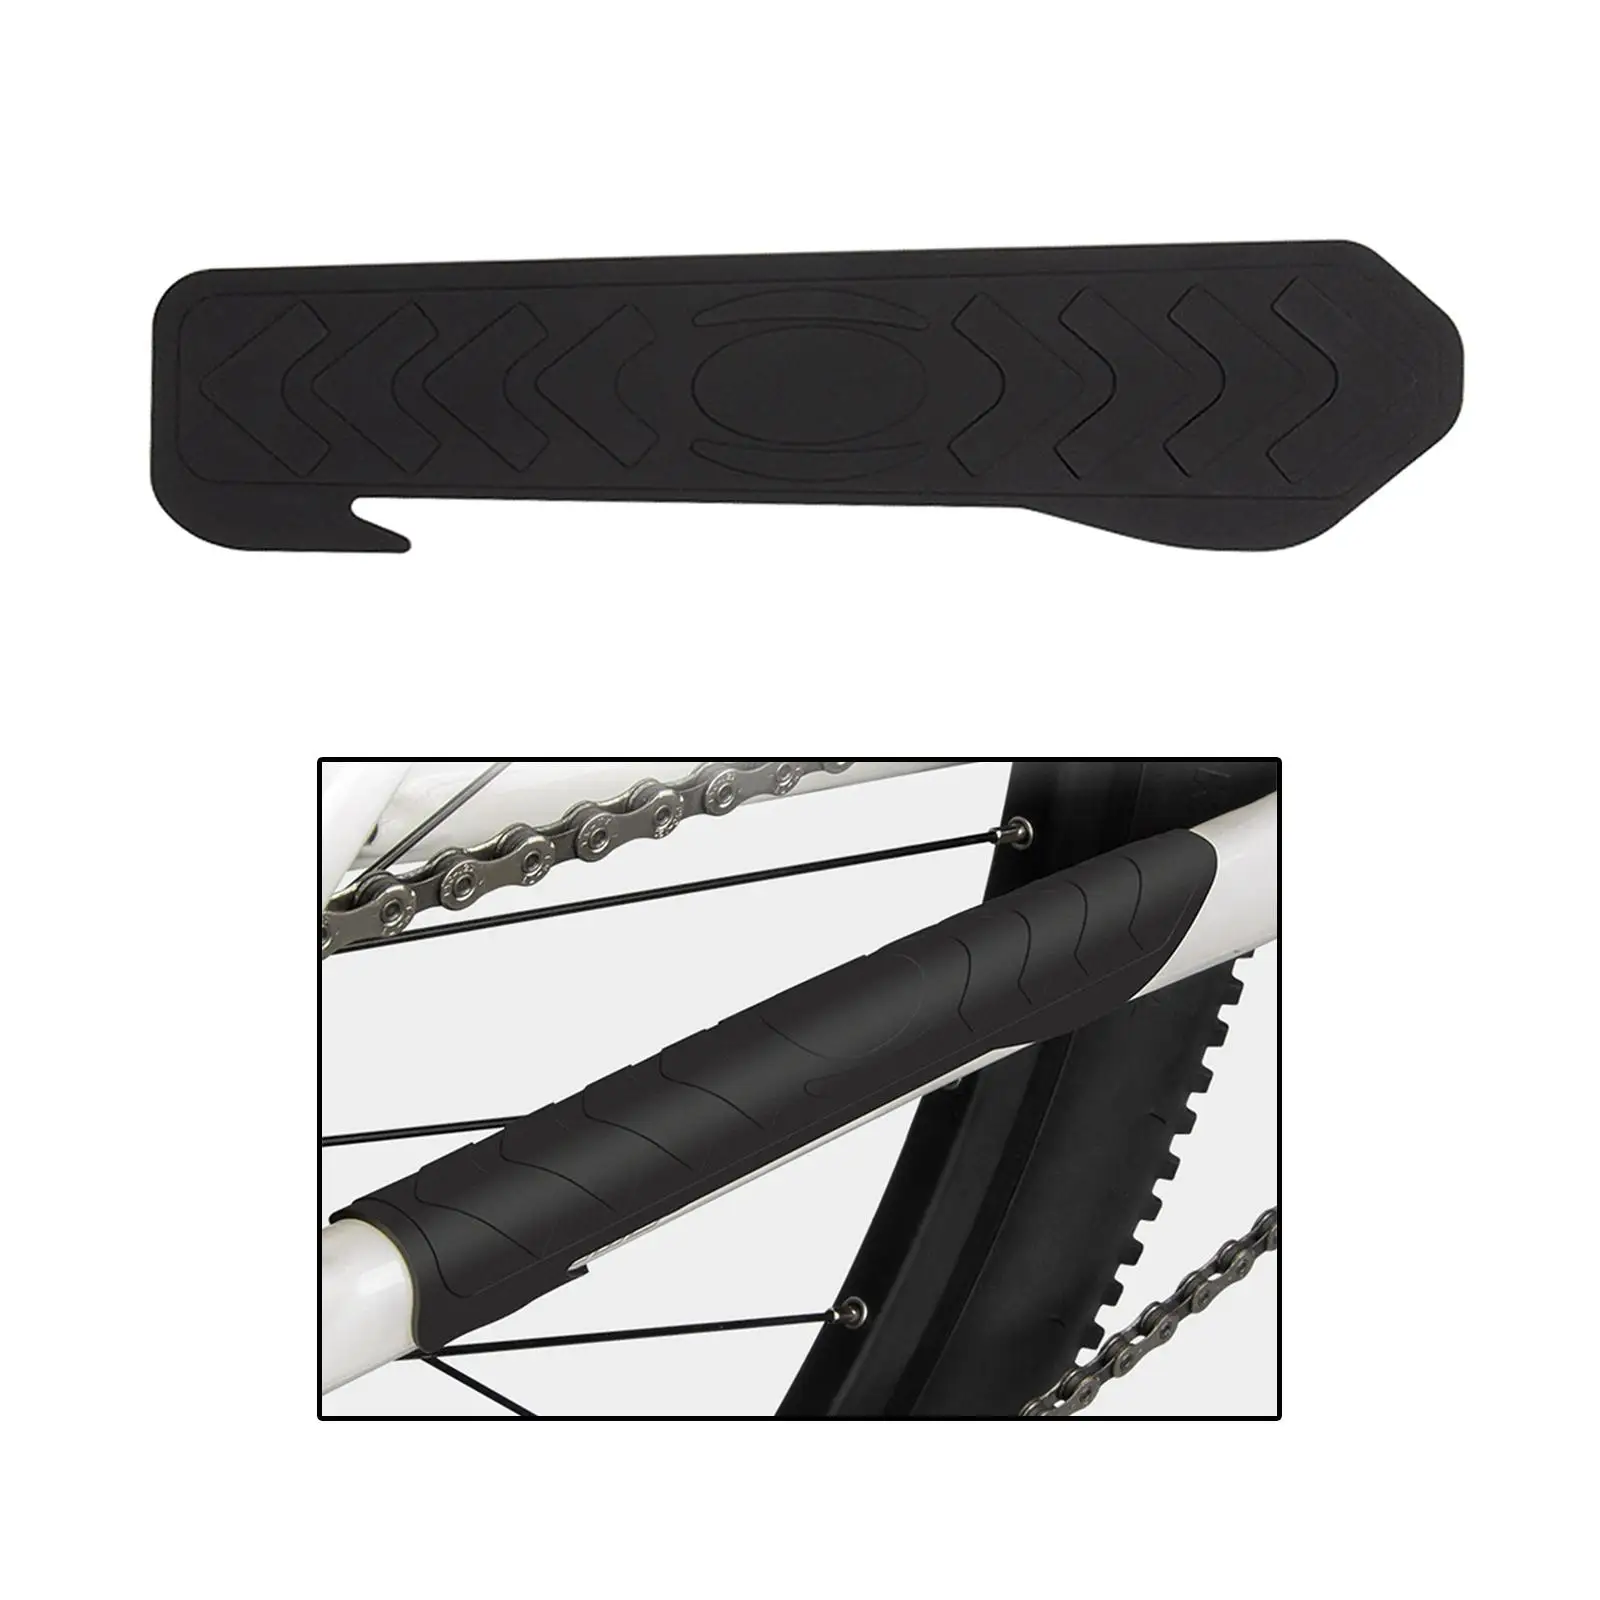 Bike Chainstay Protector Waterproof Scratch Resistant Silicone Bicycle Frame Guard Chain Stay Pad Sticker for Mountain Bikes